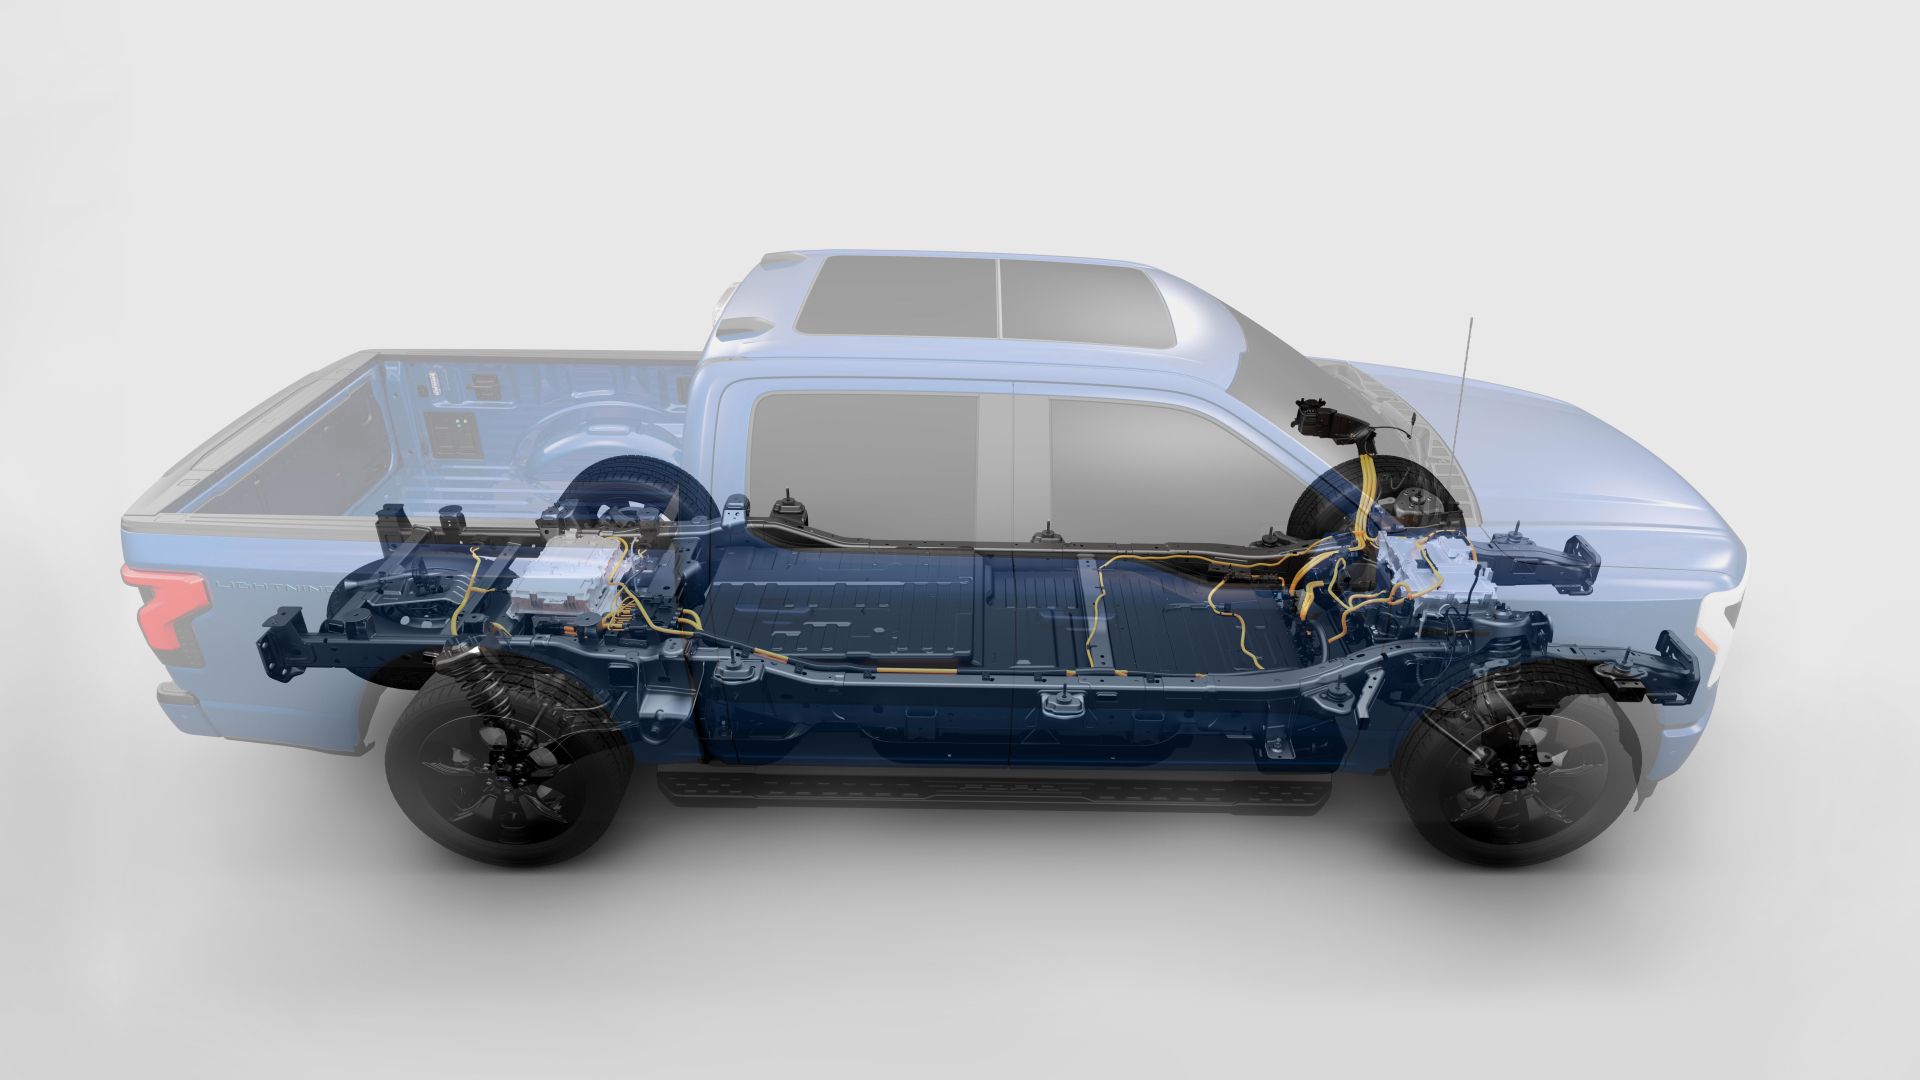 A seethrough image of F-150 Lightning showing its electric powertrain